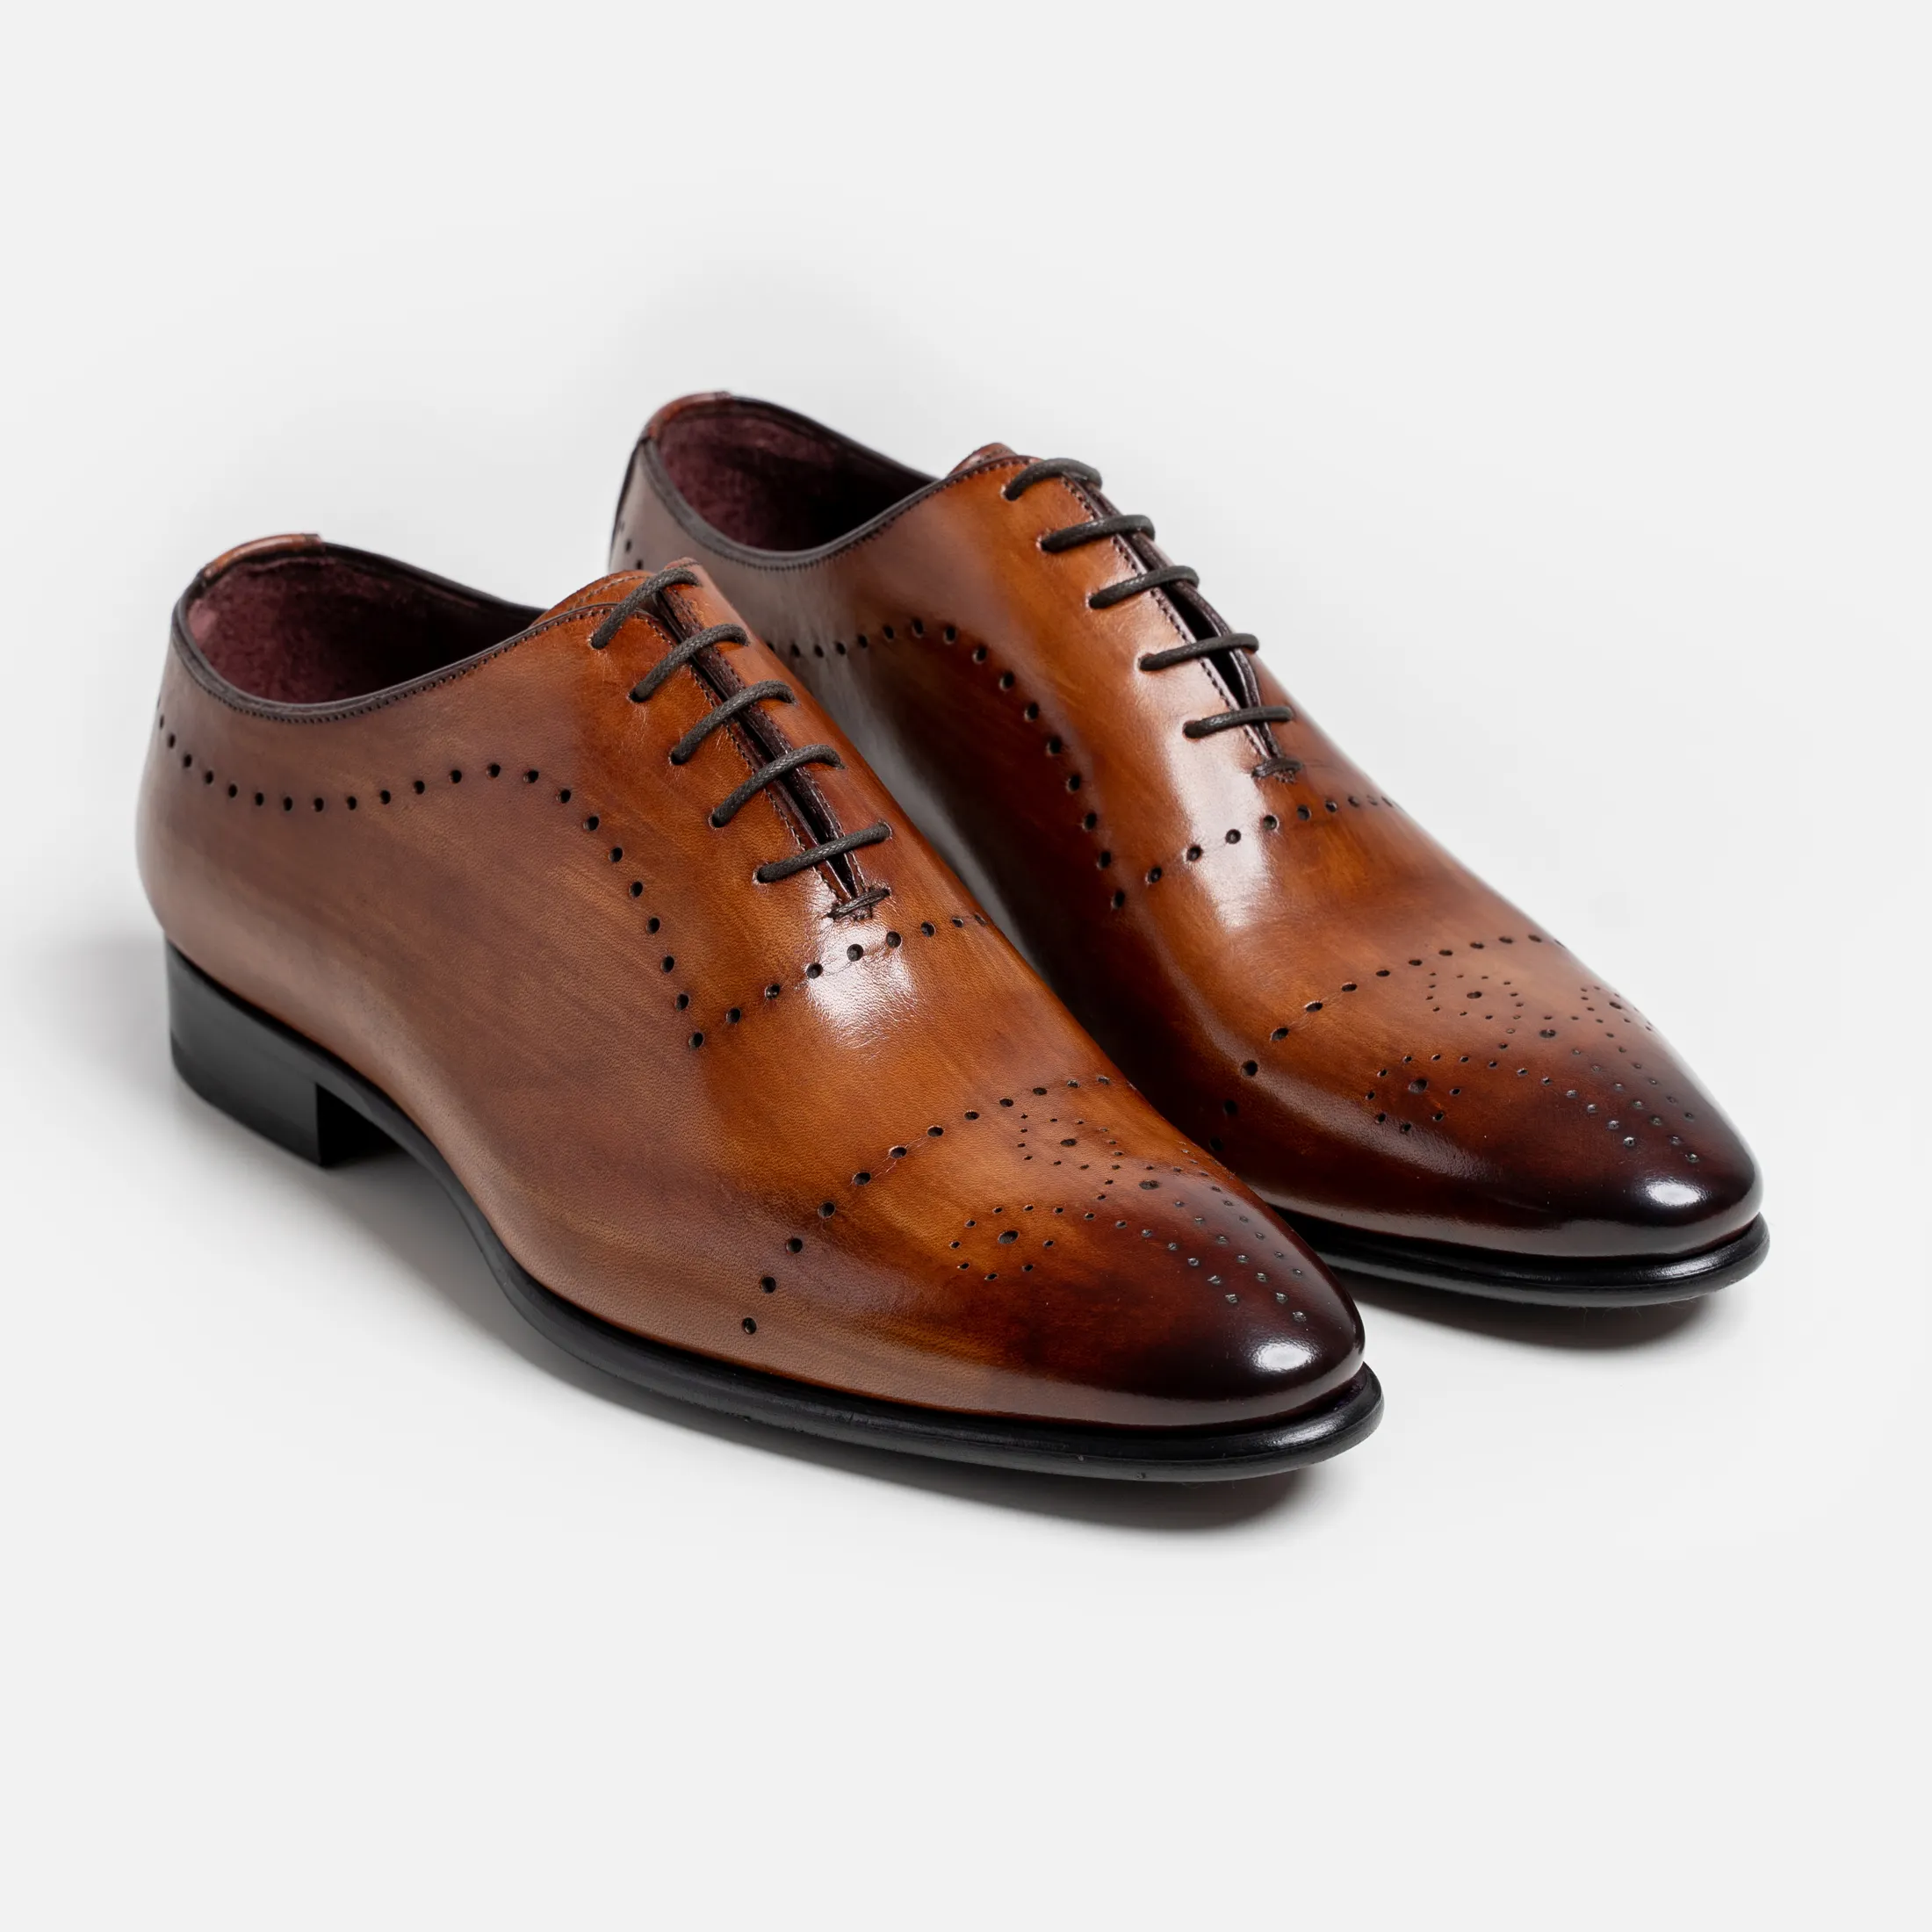 Made in Italy Lace up Oxford in Brandy color patina Full Leather Handmade Men shoes